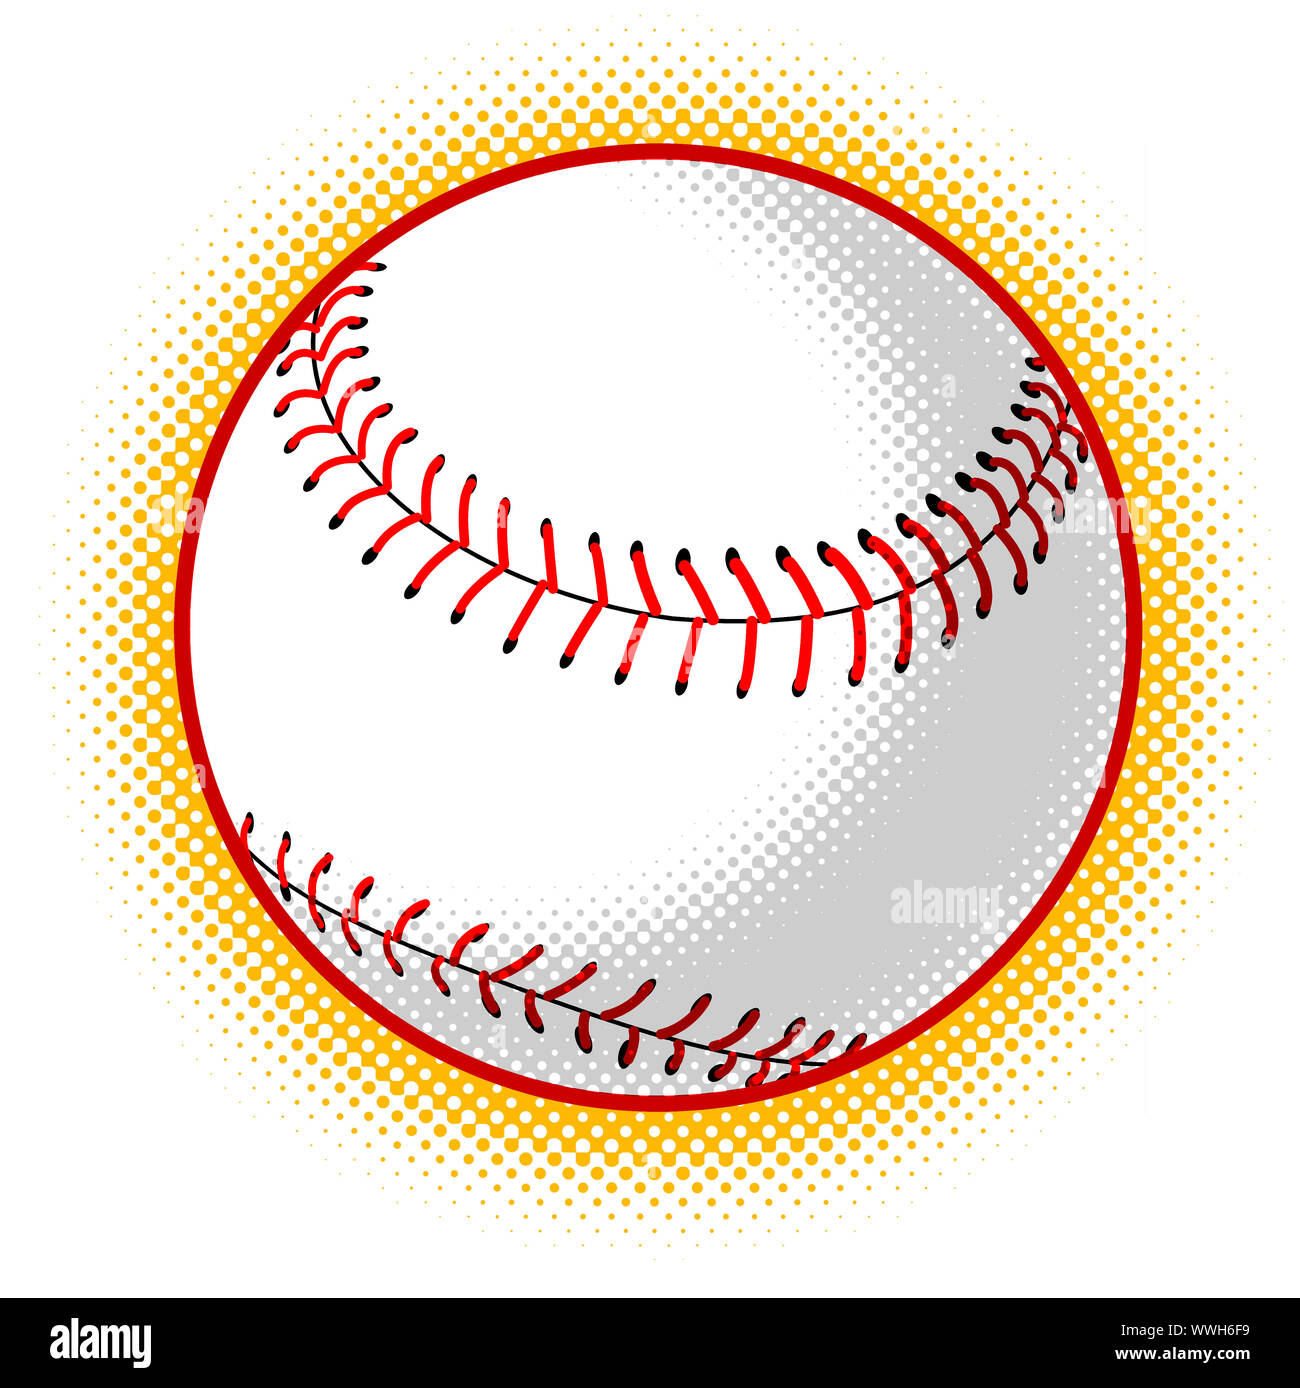 Illustration of a baseball ball with halftone dots in background on isolated background Stock Photo